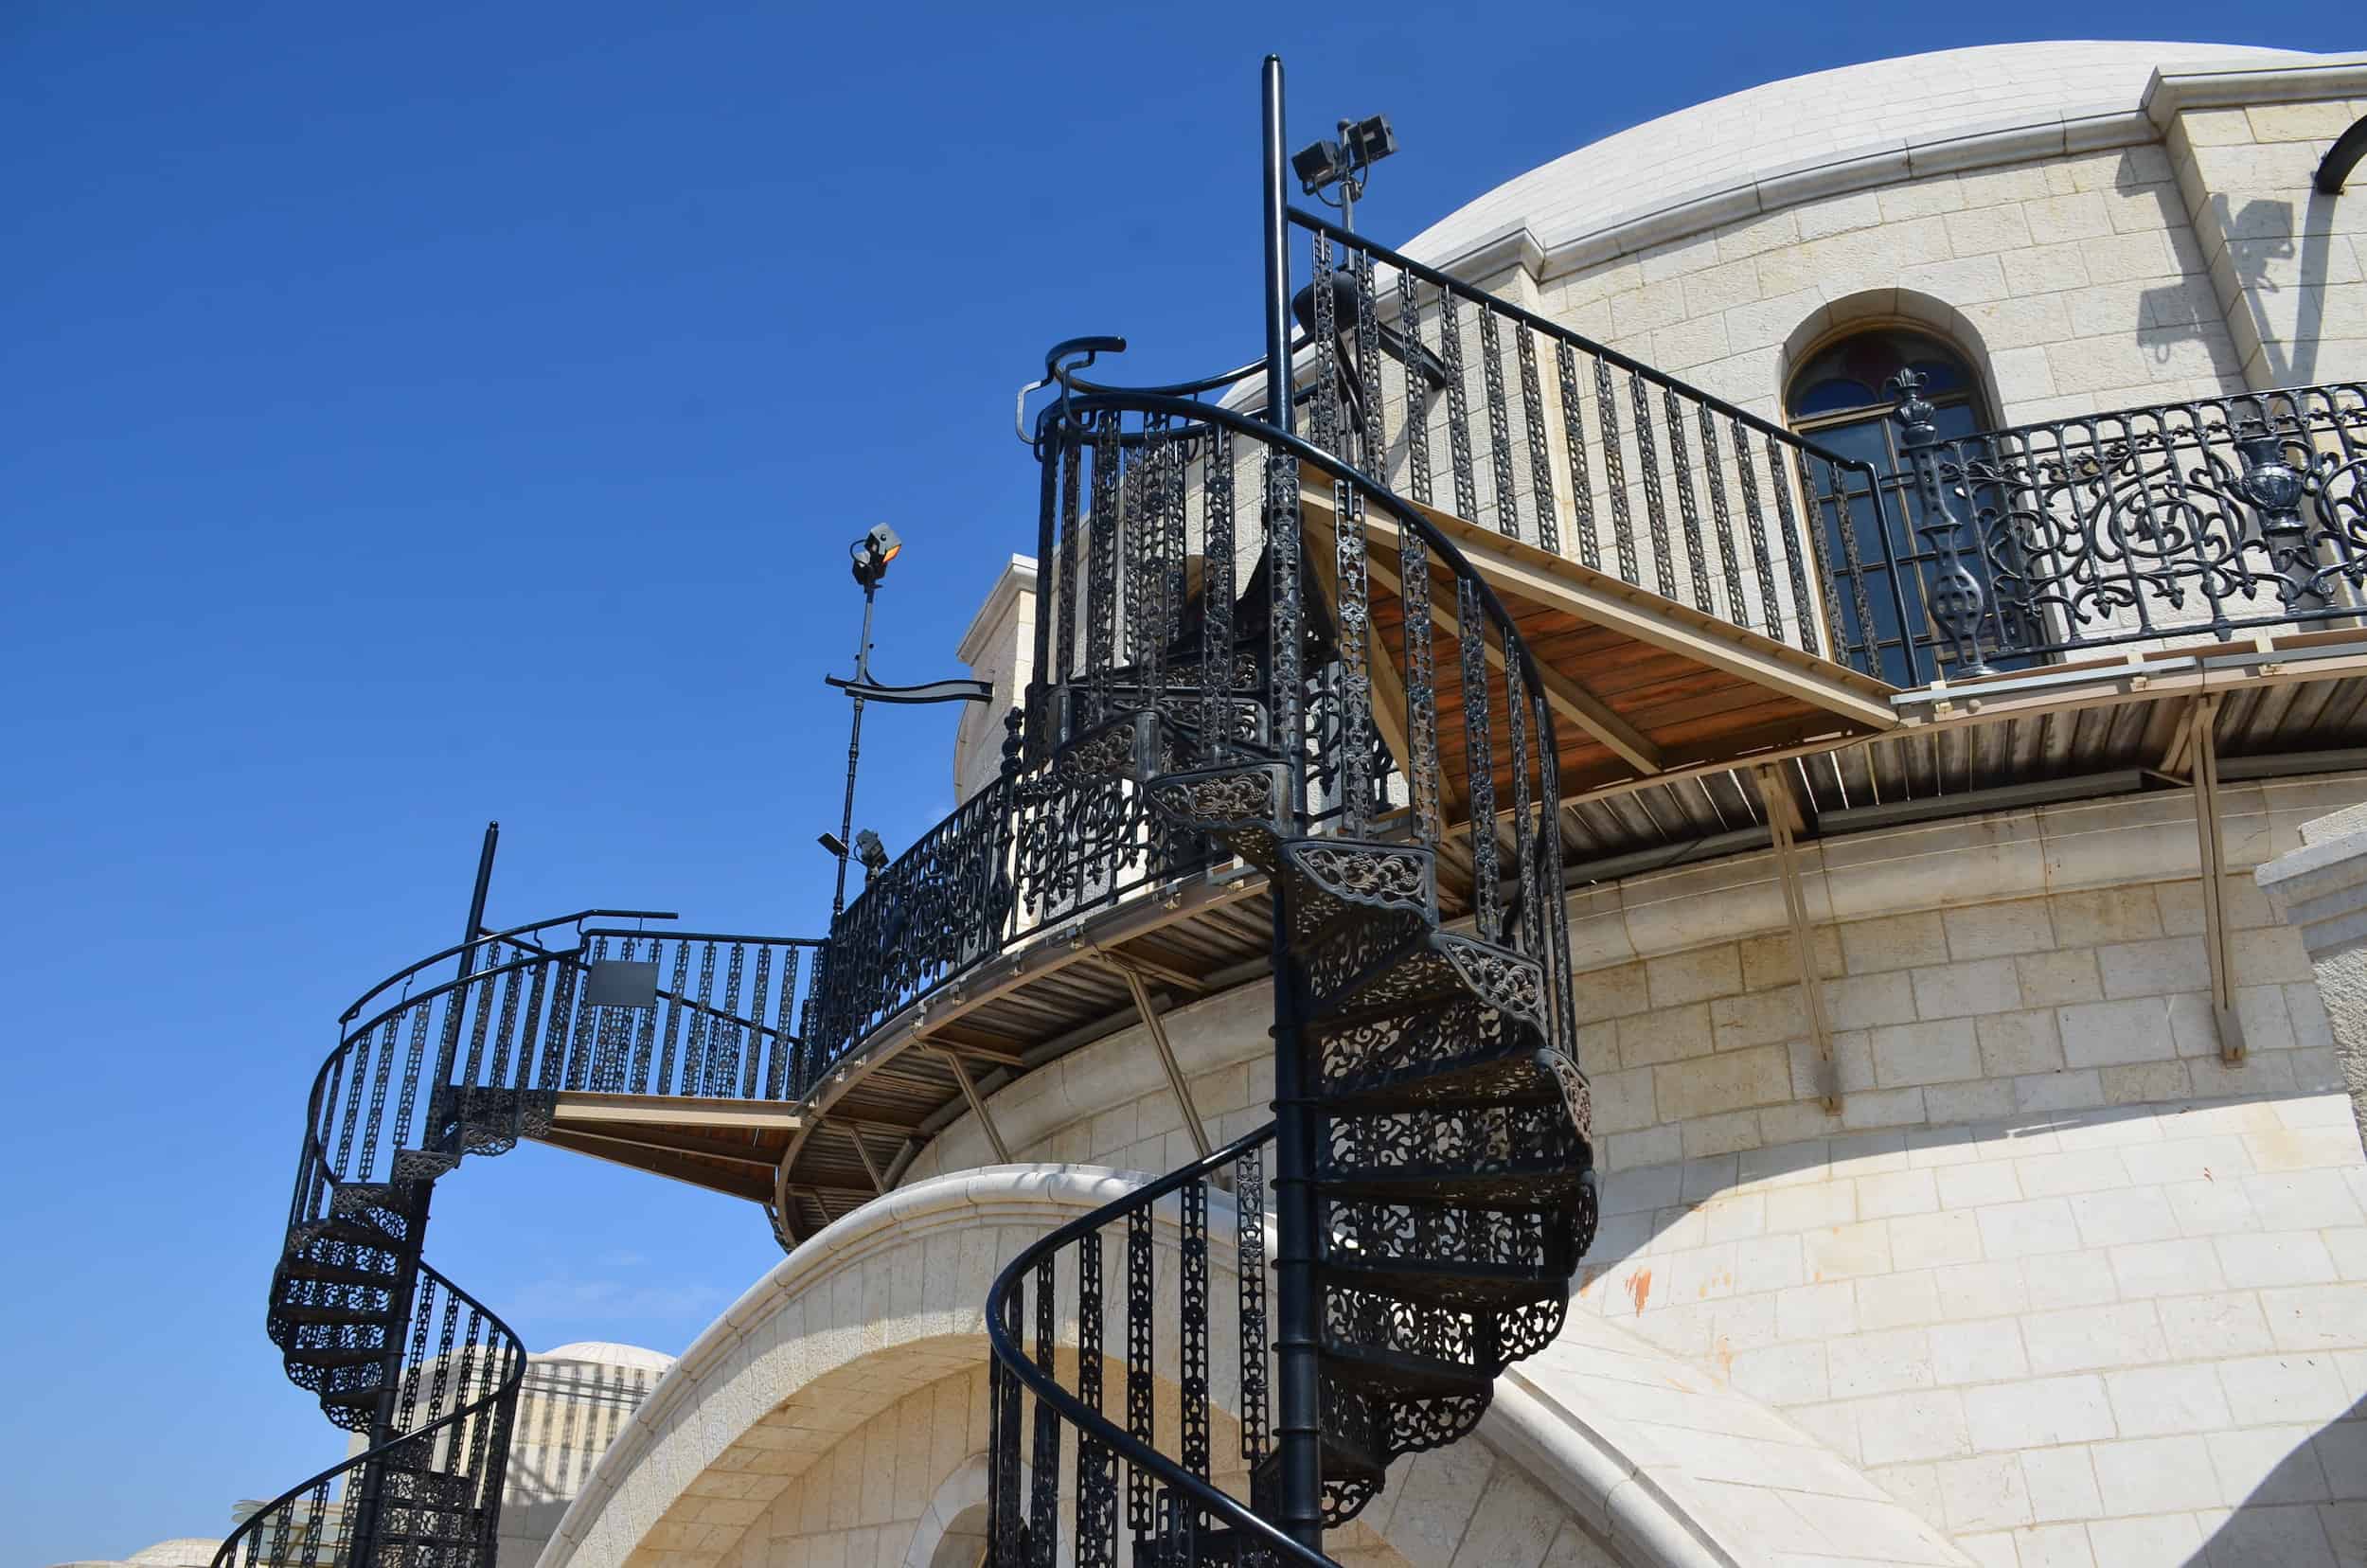 Spiral staircases at the Hurva Synagogue in the Jewish Quarter of Jerusalem